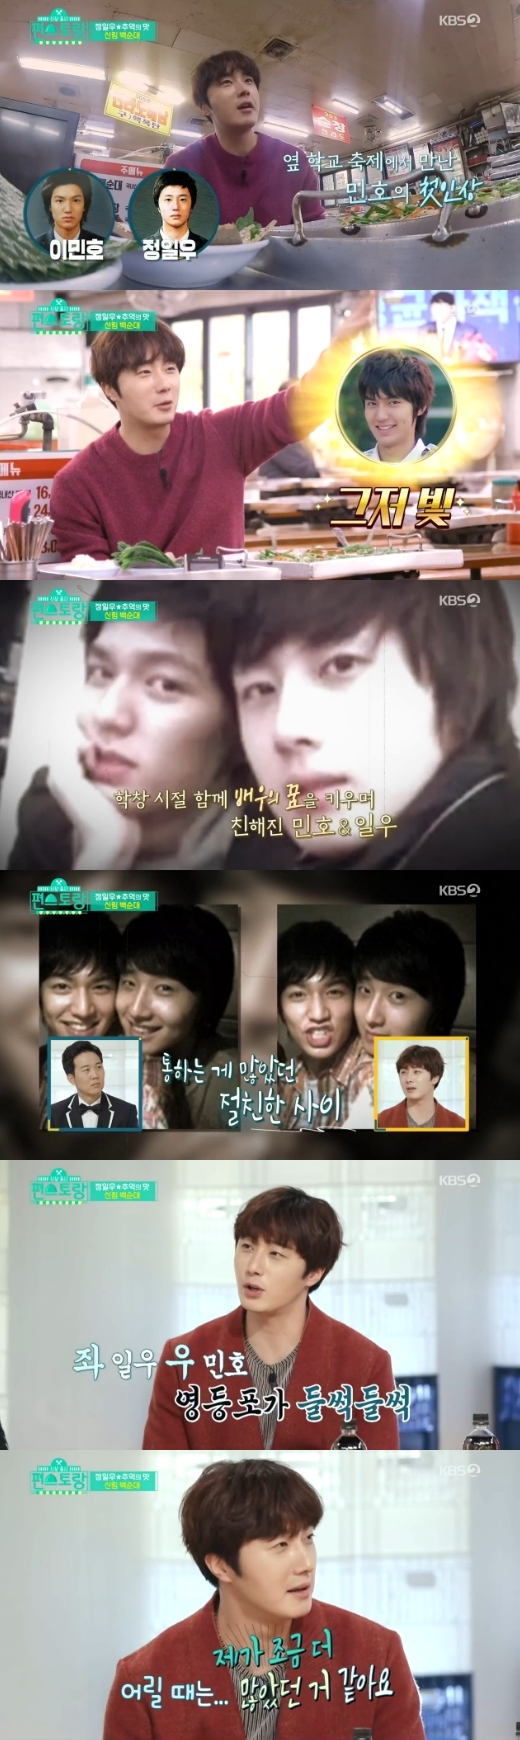 Jung Il-woo spoke about Lee Min-ho as a child.Jung Il-woo visited Shinlim-dong and performed Baeksundaes food at the KBS 2TV entertainment program Stars from Shinsang at Fun-Staurant, which aired on the 17th night.While eating the white sundae, Jung Il-woo said, There were only two most famous people in our neighborhood. Lee Min-ho, Jung Il-woo.When I was a kid, I went to Minhos school festival and there was a shiny kid walking around in the distance, thinking, What is he? Like me?Its a joke, and Minho has been handsome since he was a real kid.Jung Il-woo said, Minhorang has been growing up as an actor since he was a child, and he has become very close to something, he said.When asked about the popularity, Jung Il-woo laughed, saying, I think I was a little more when I was young.